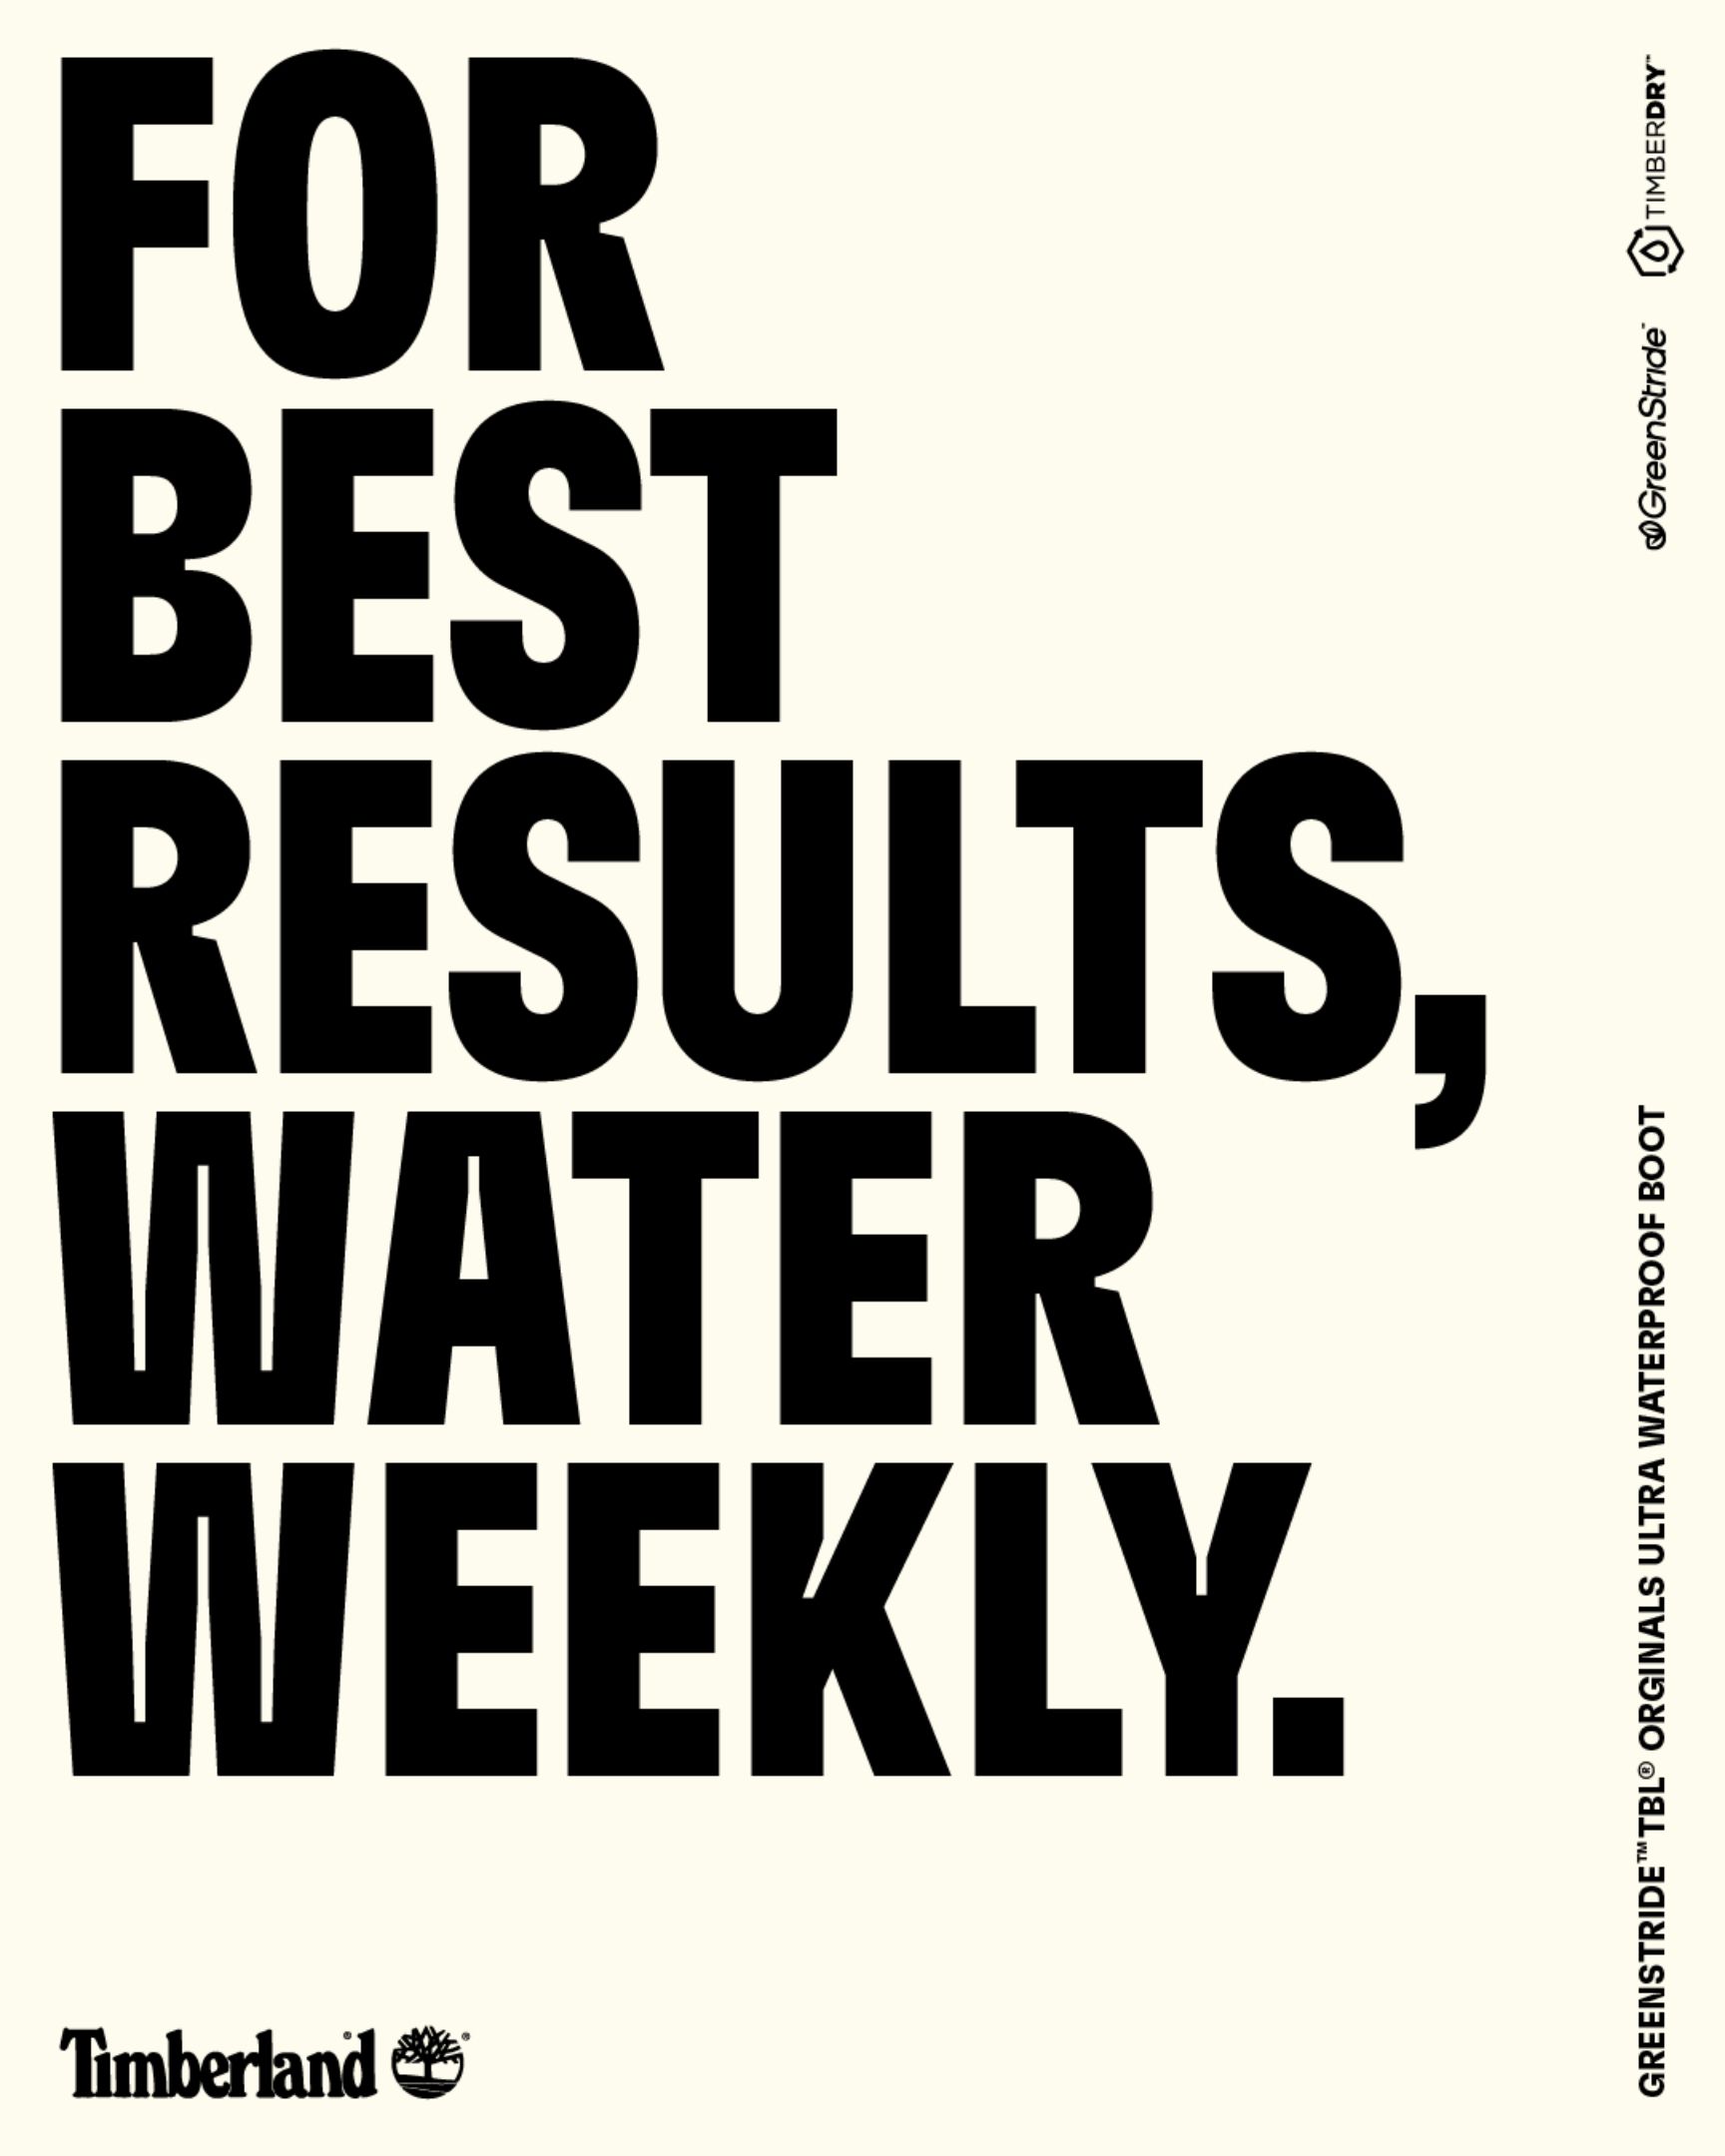 For best results, water weekly